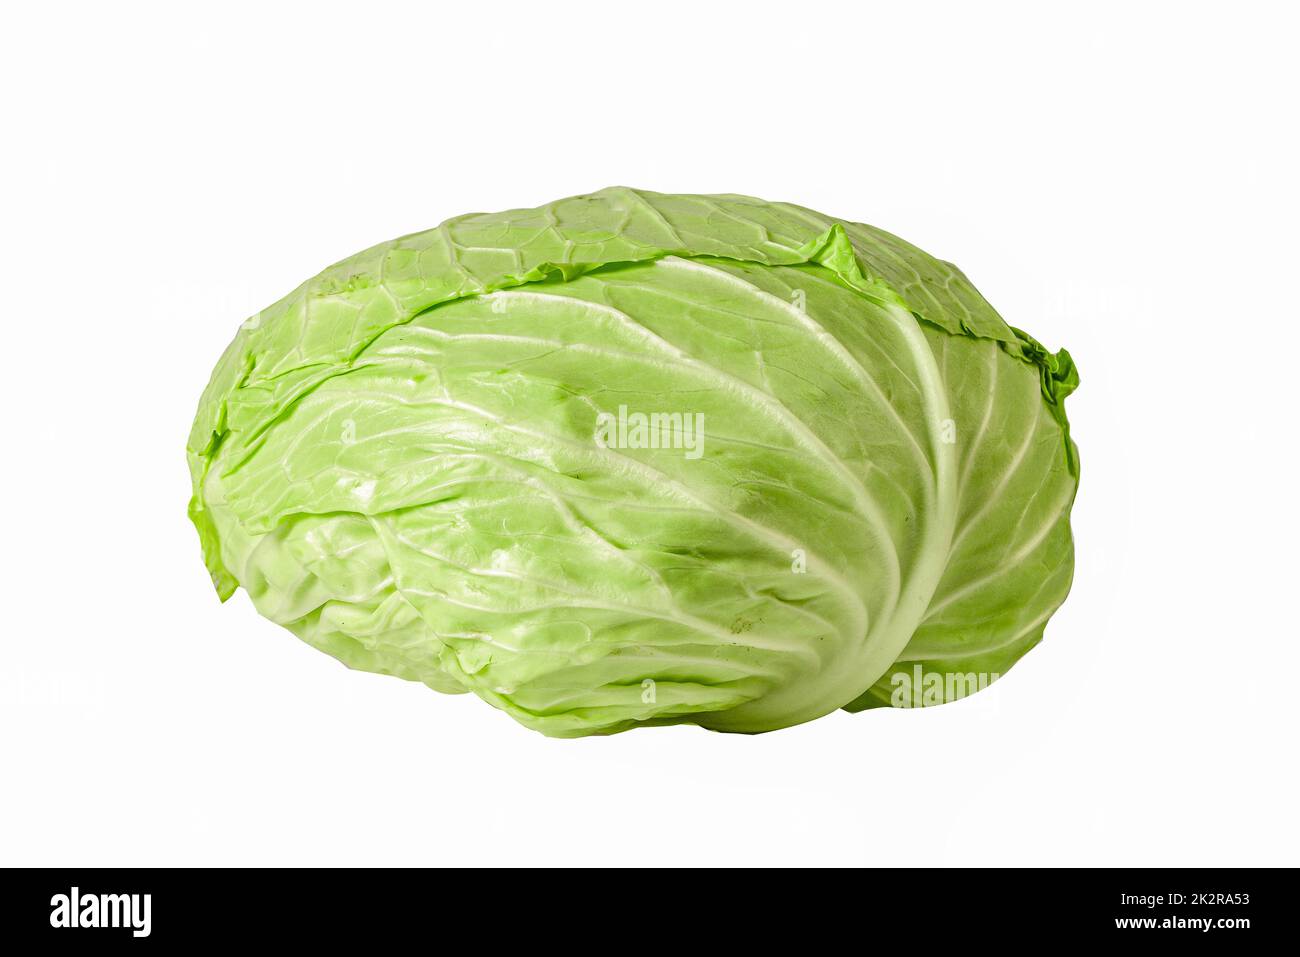 Cabbage fresh vegetable isolated on white background with clipping path. Stock Photo